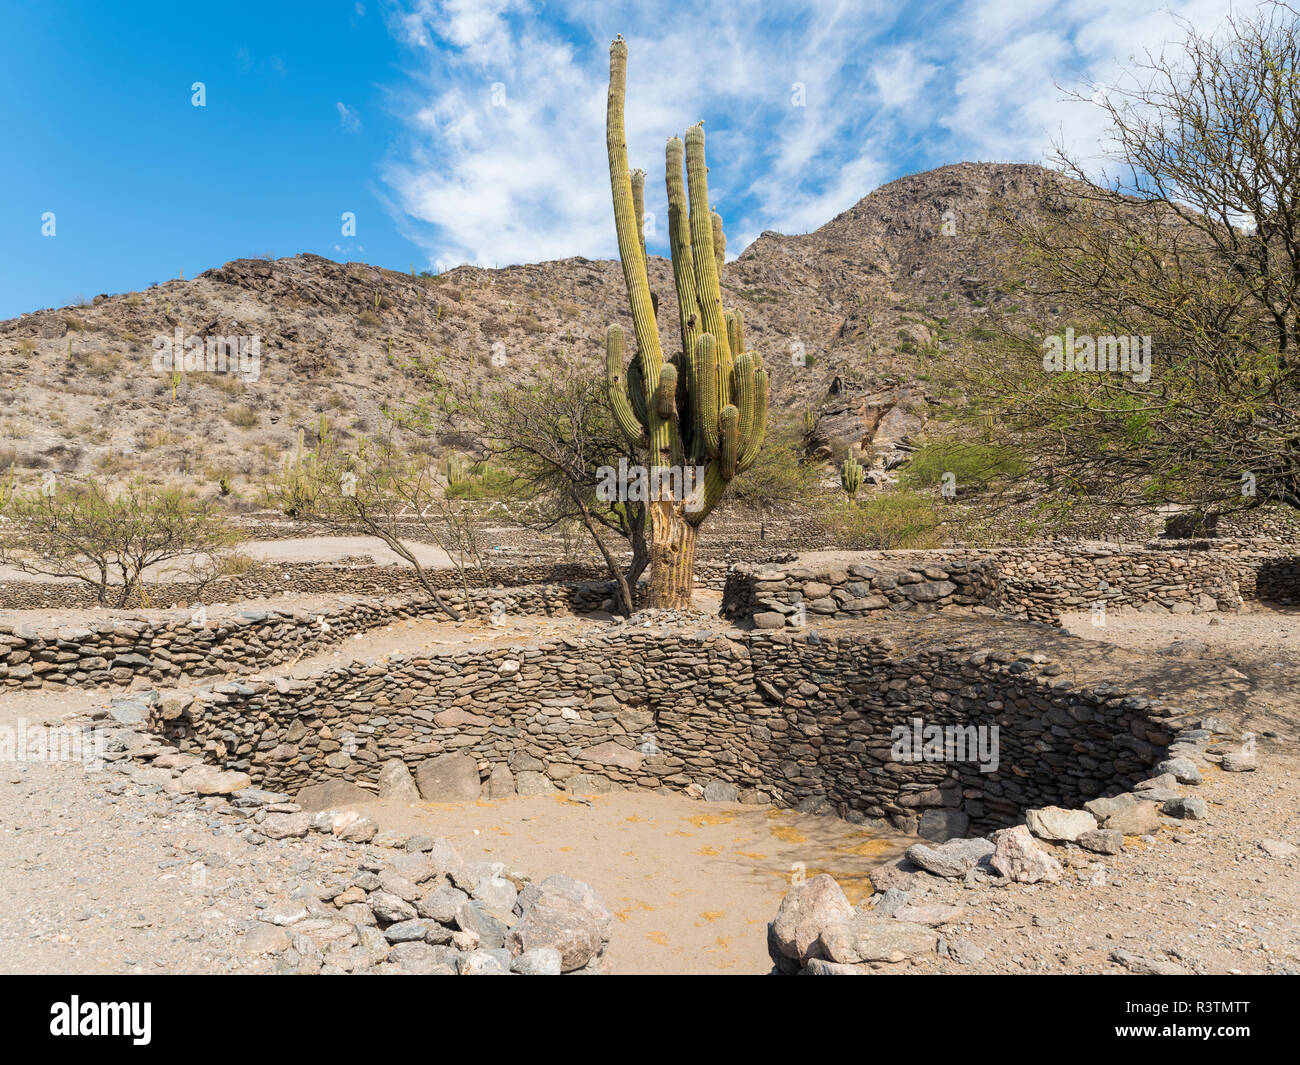 Ruins of Quilmes near Tucuman and Cafayate. Quilmes is considered as the biggest pre-Columbian settlement in Argentina. (Editorial Use Only) Stock Photo